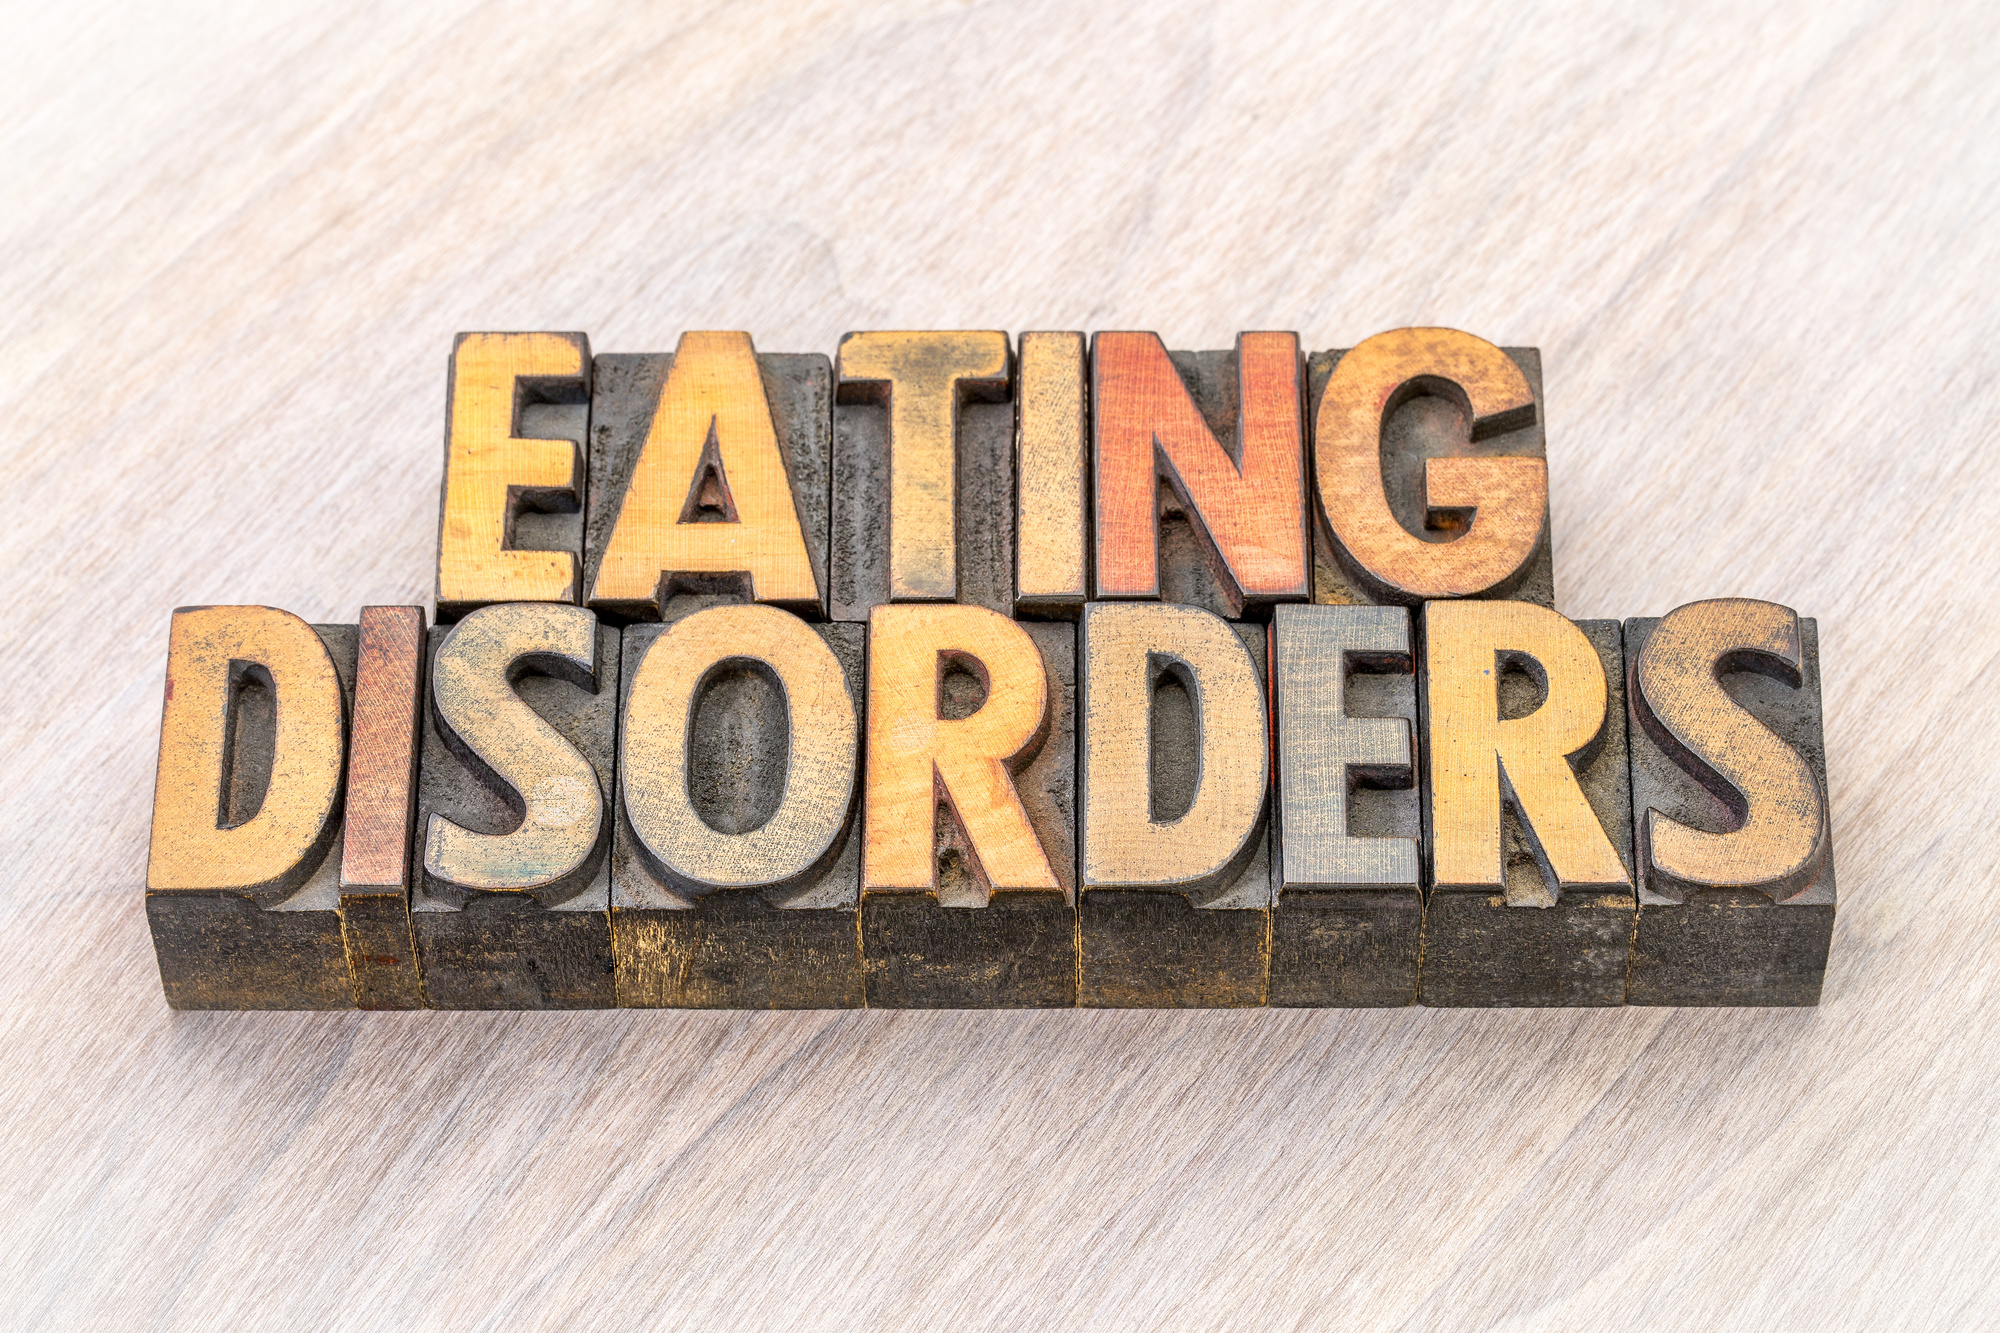 A Guide to the Treatment Options for Eating Disorders